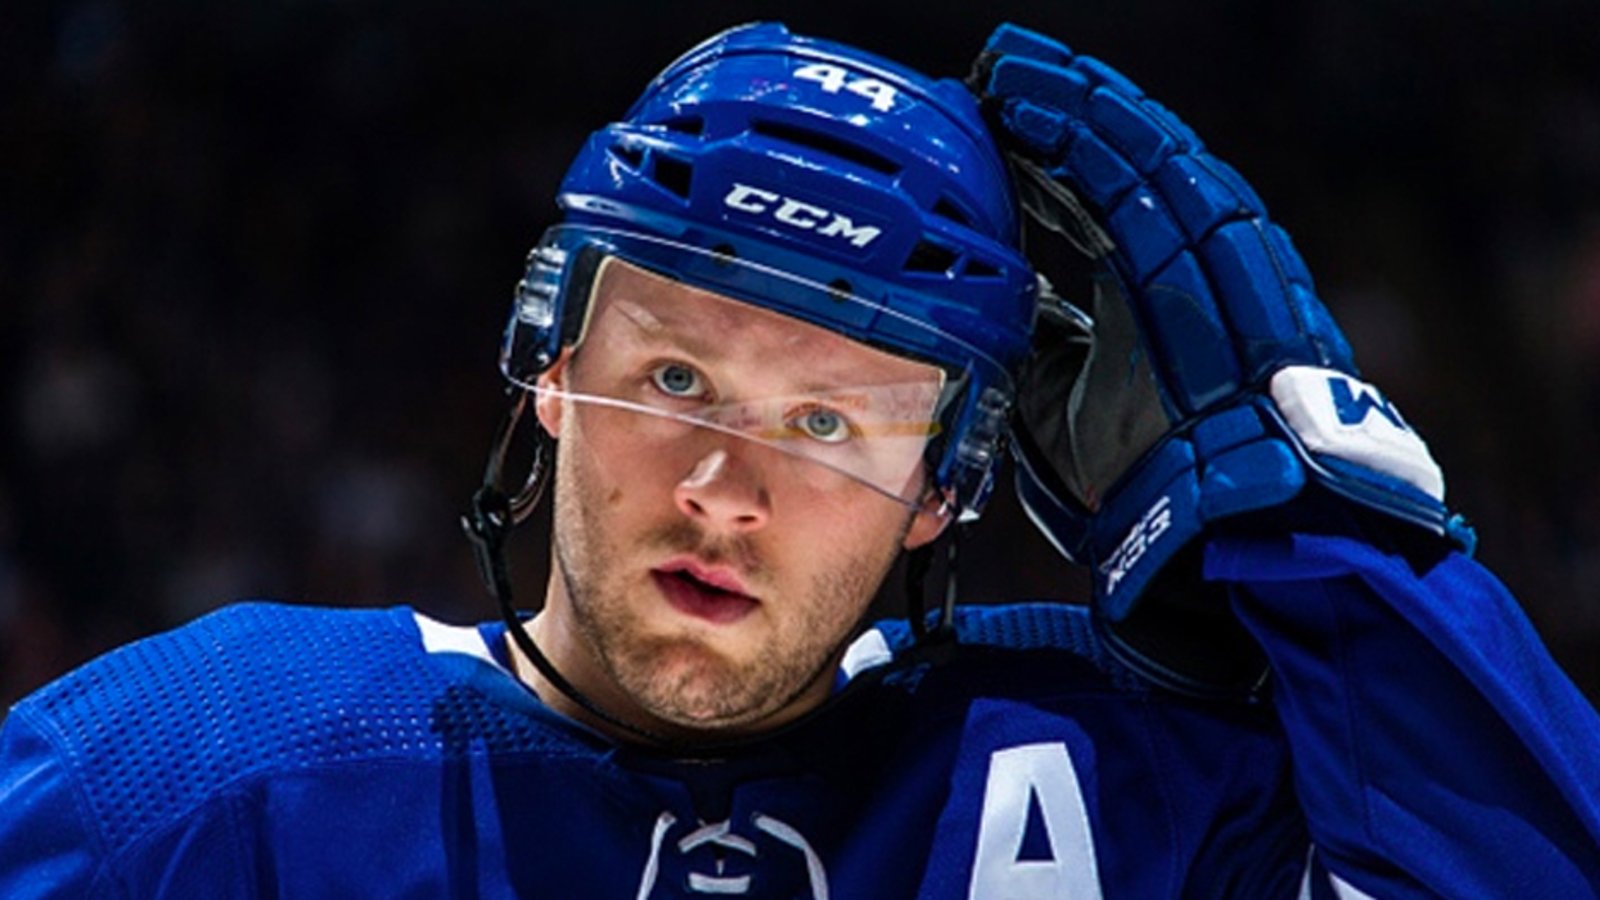 Morgan Rielly's time with the Leafs coming to an end?